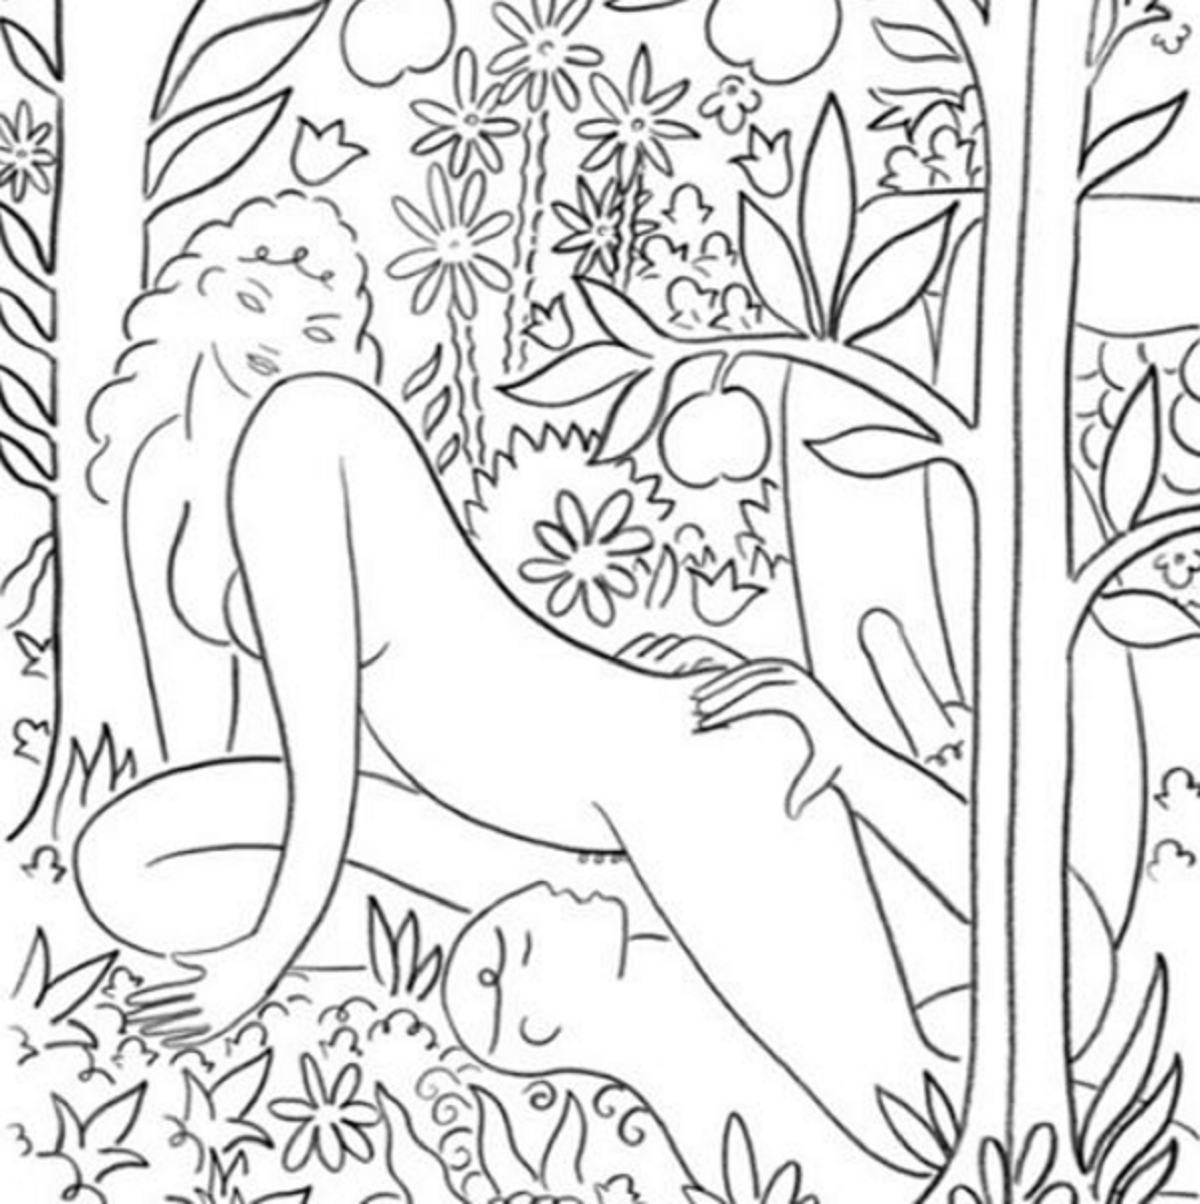 Pornhub has published a colouring book.